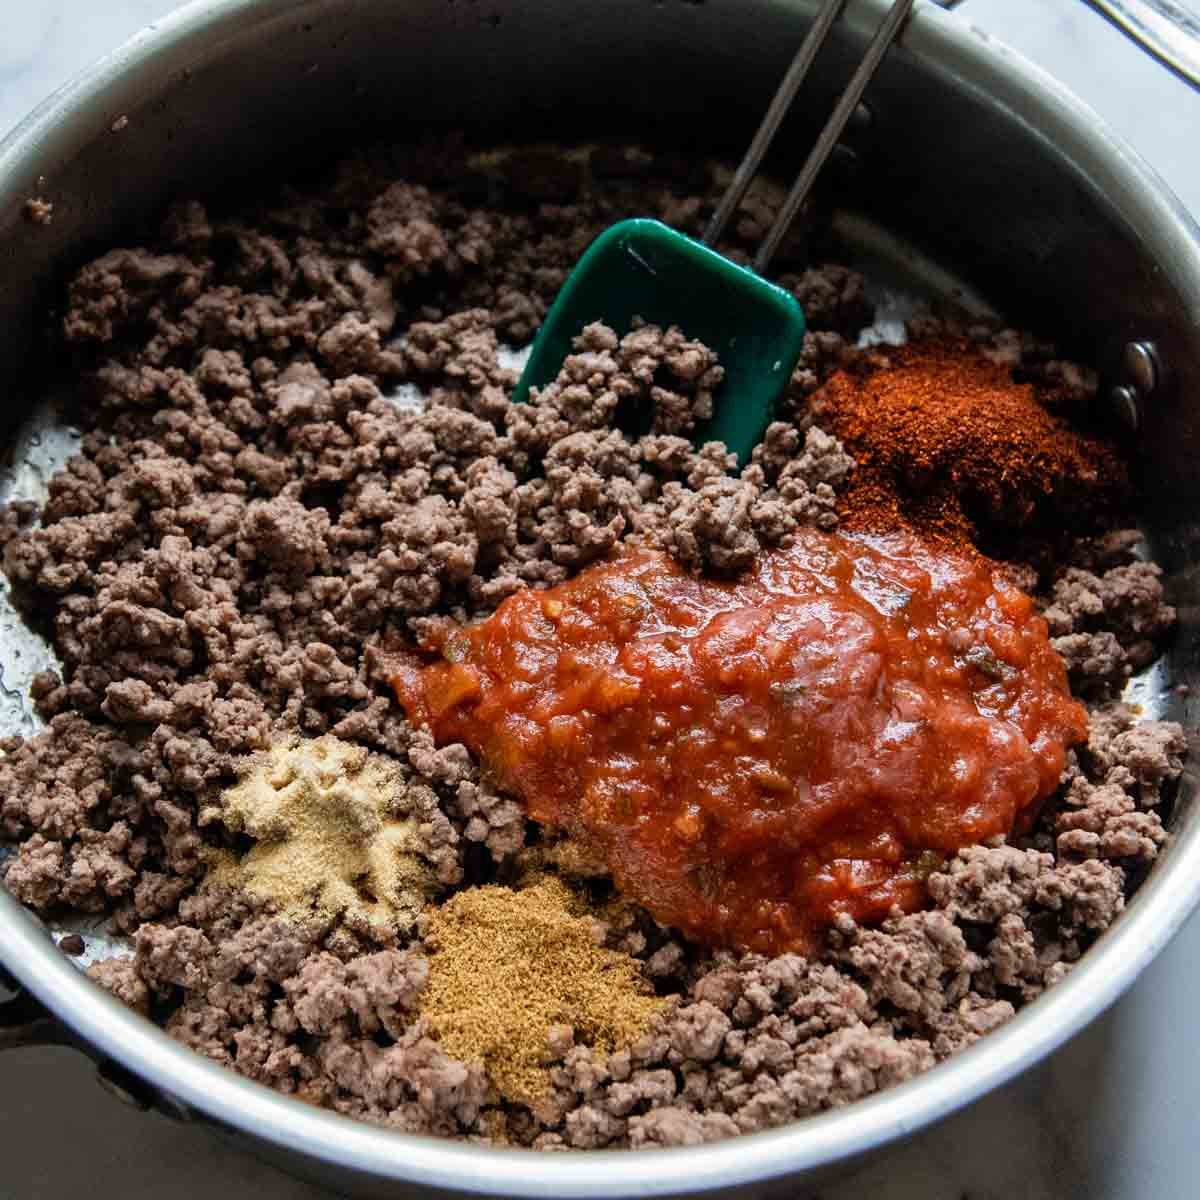 the taco meat being made in skillet.